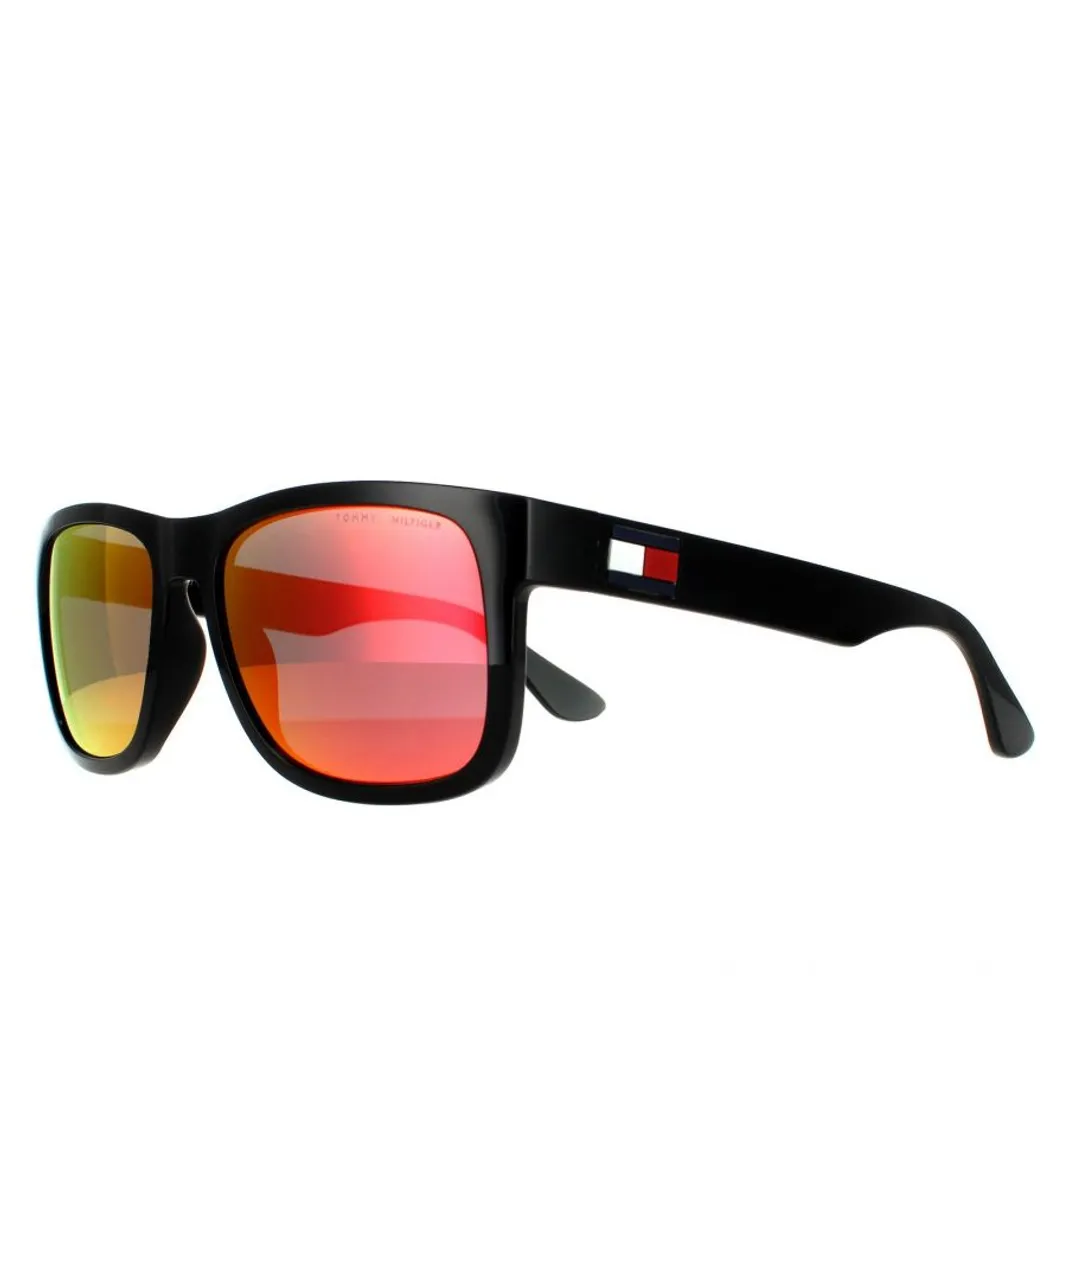 Tommy Hilfiger Rectangle Mens Black Red Mirror Sunglasses - One